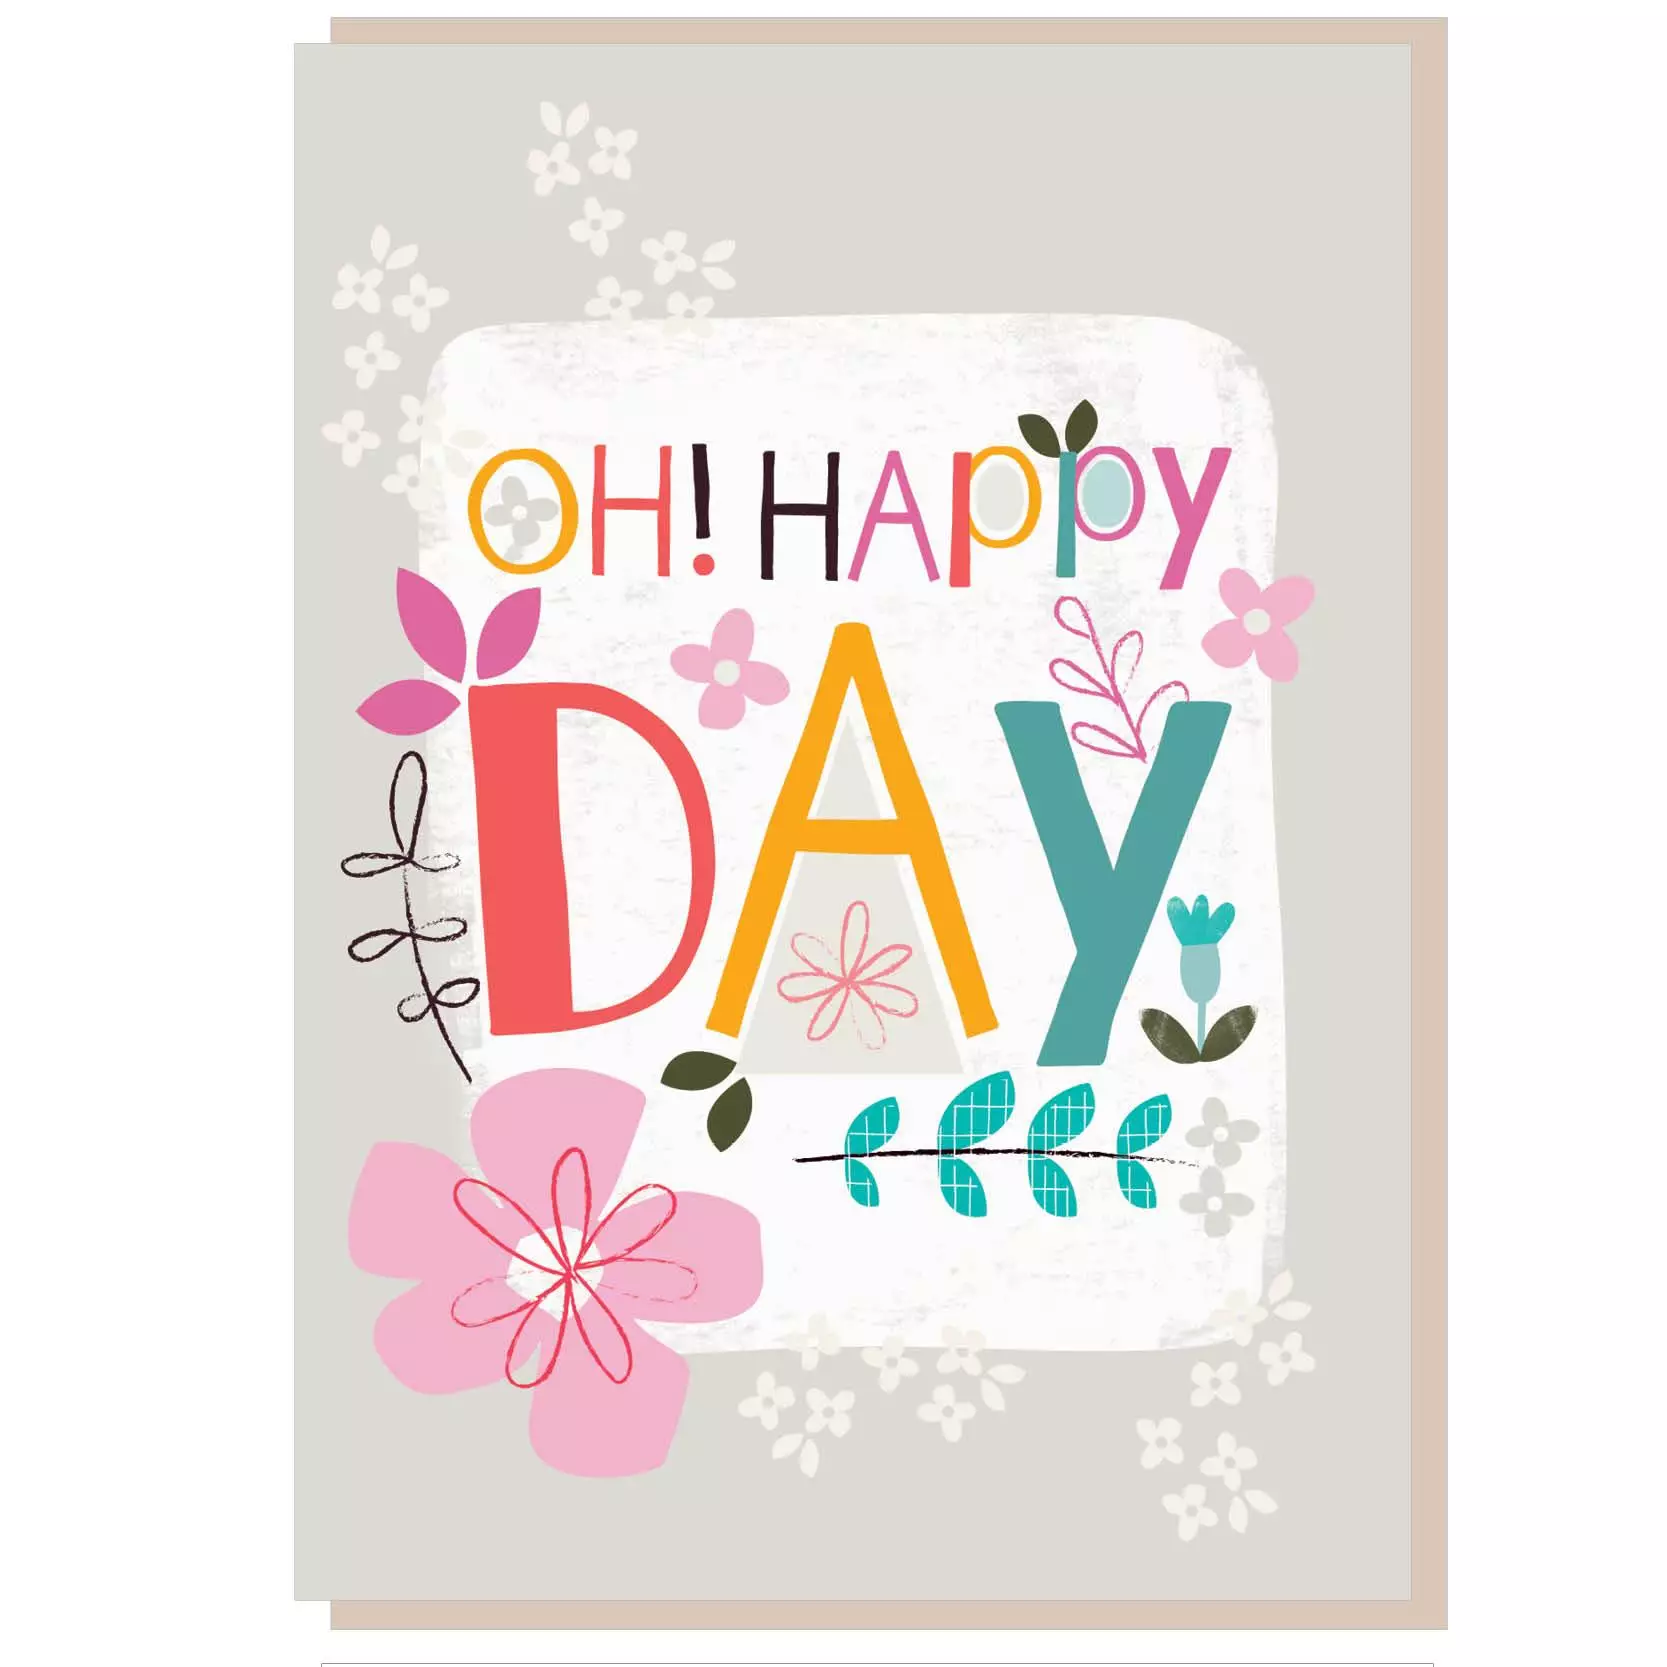 Oh Happy day Greetings Card